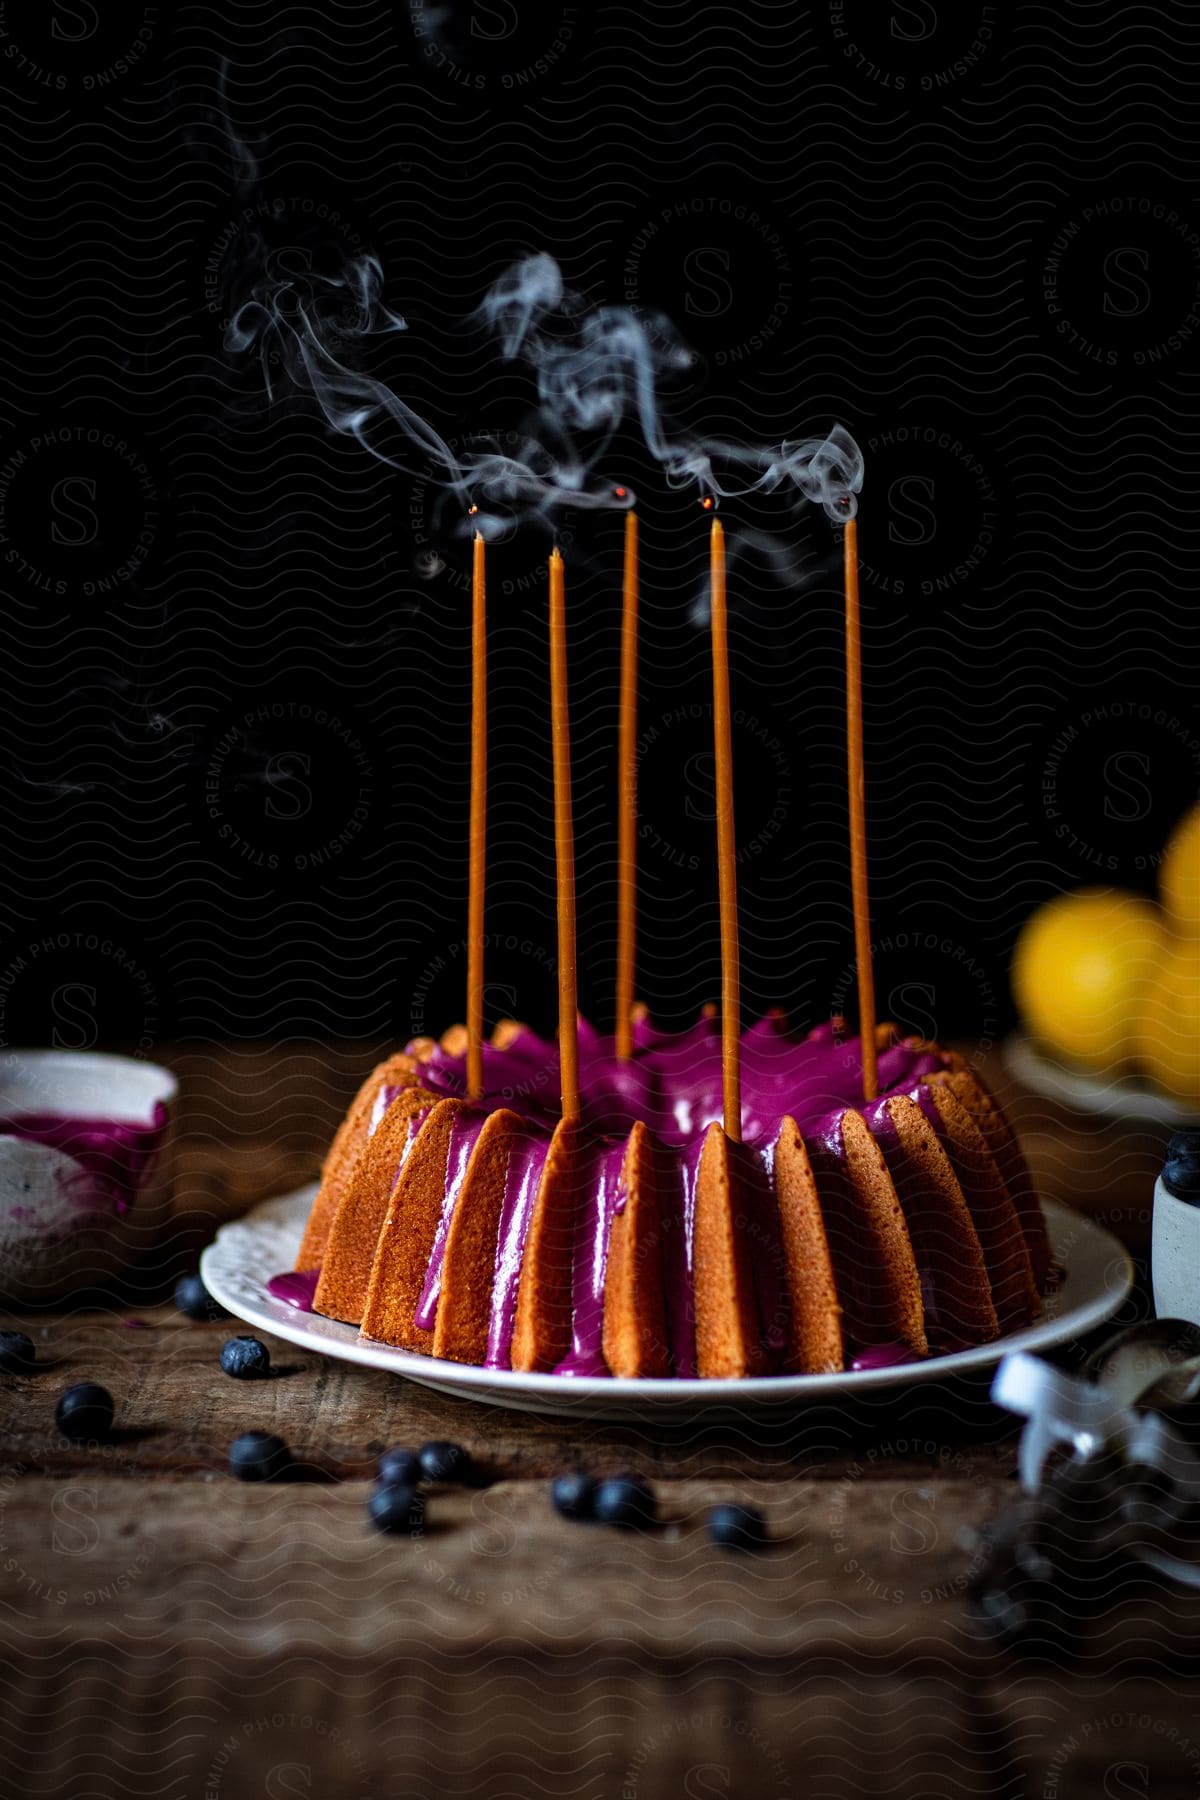 A blueberry glazed bunt cake with candles is on a plate with blueberries on a table with a cup and plate of oranges